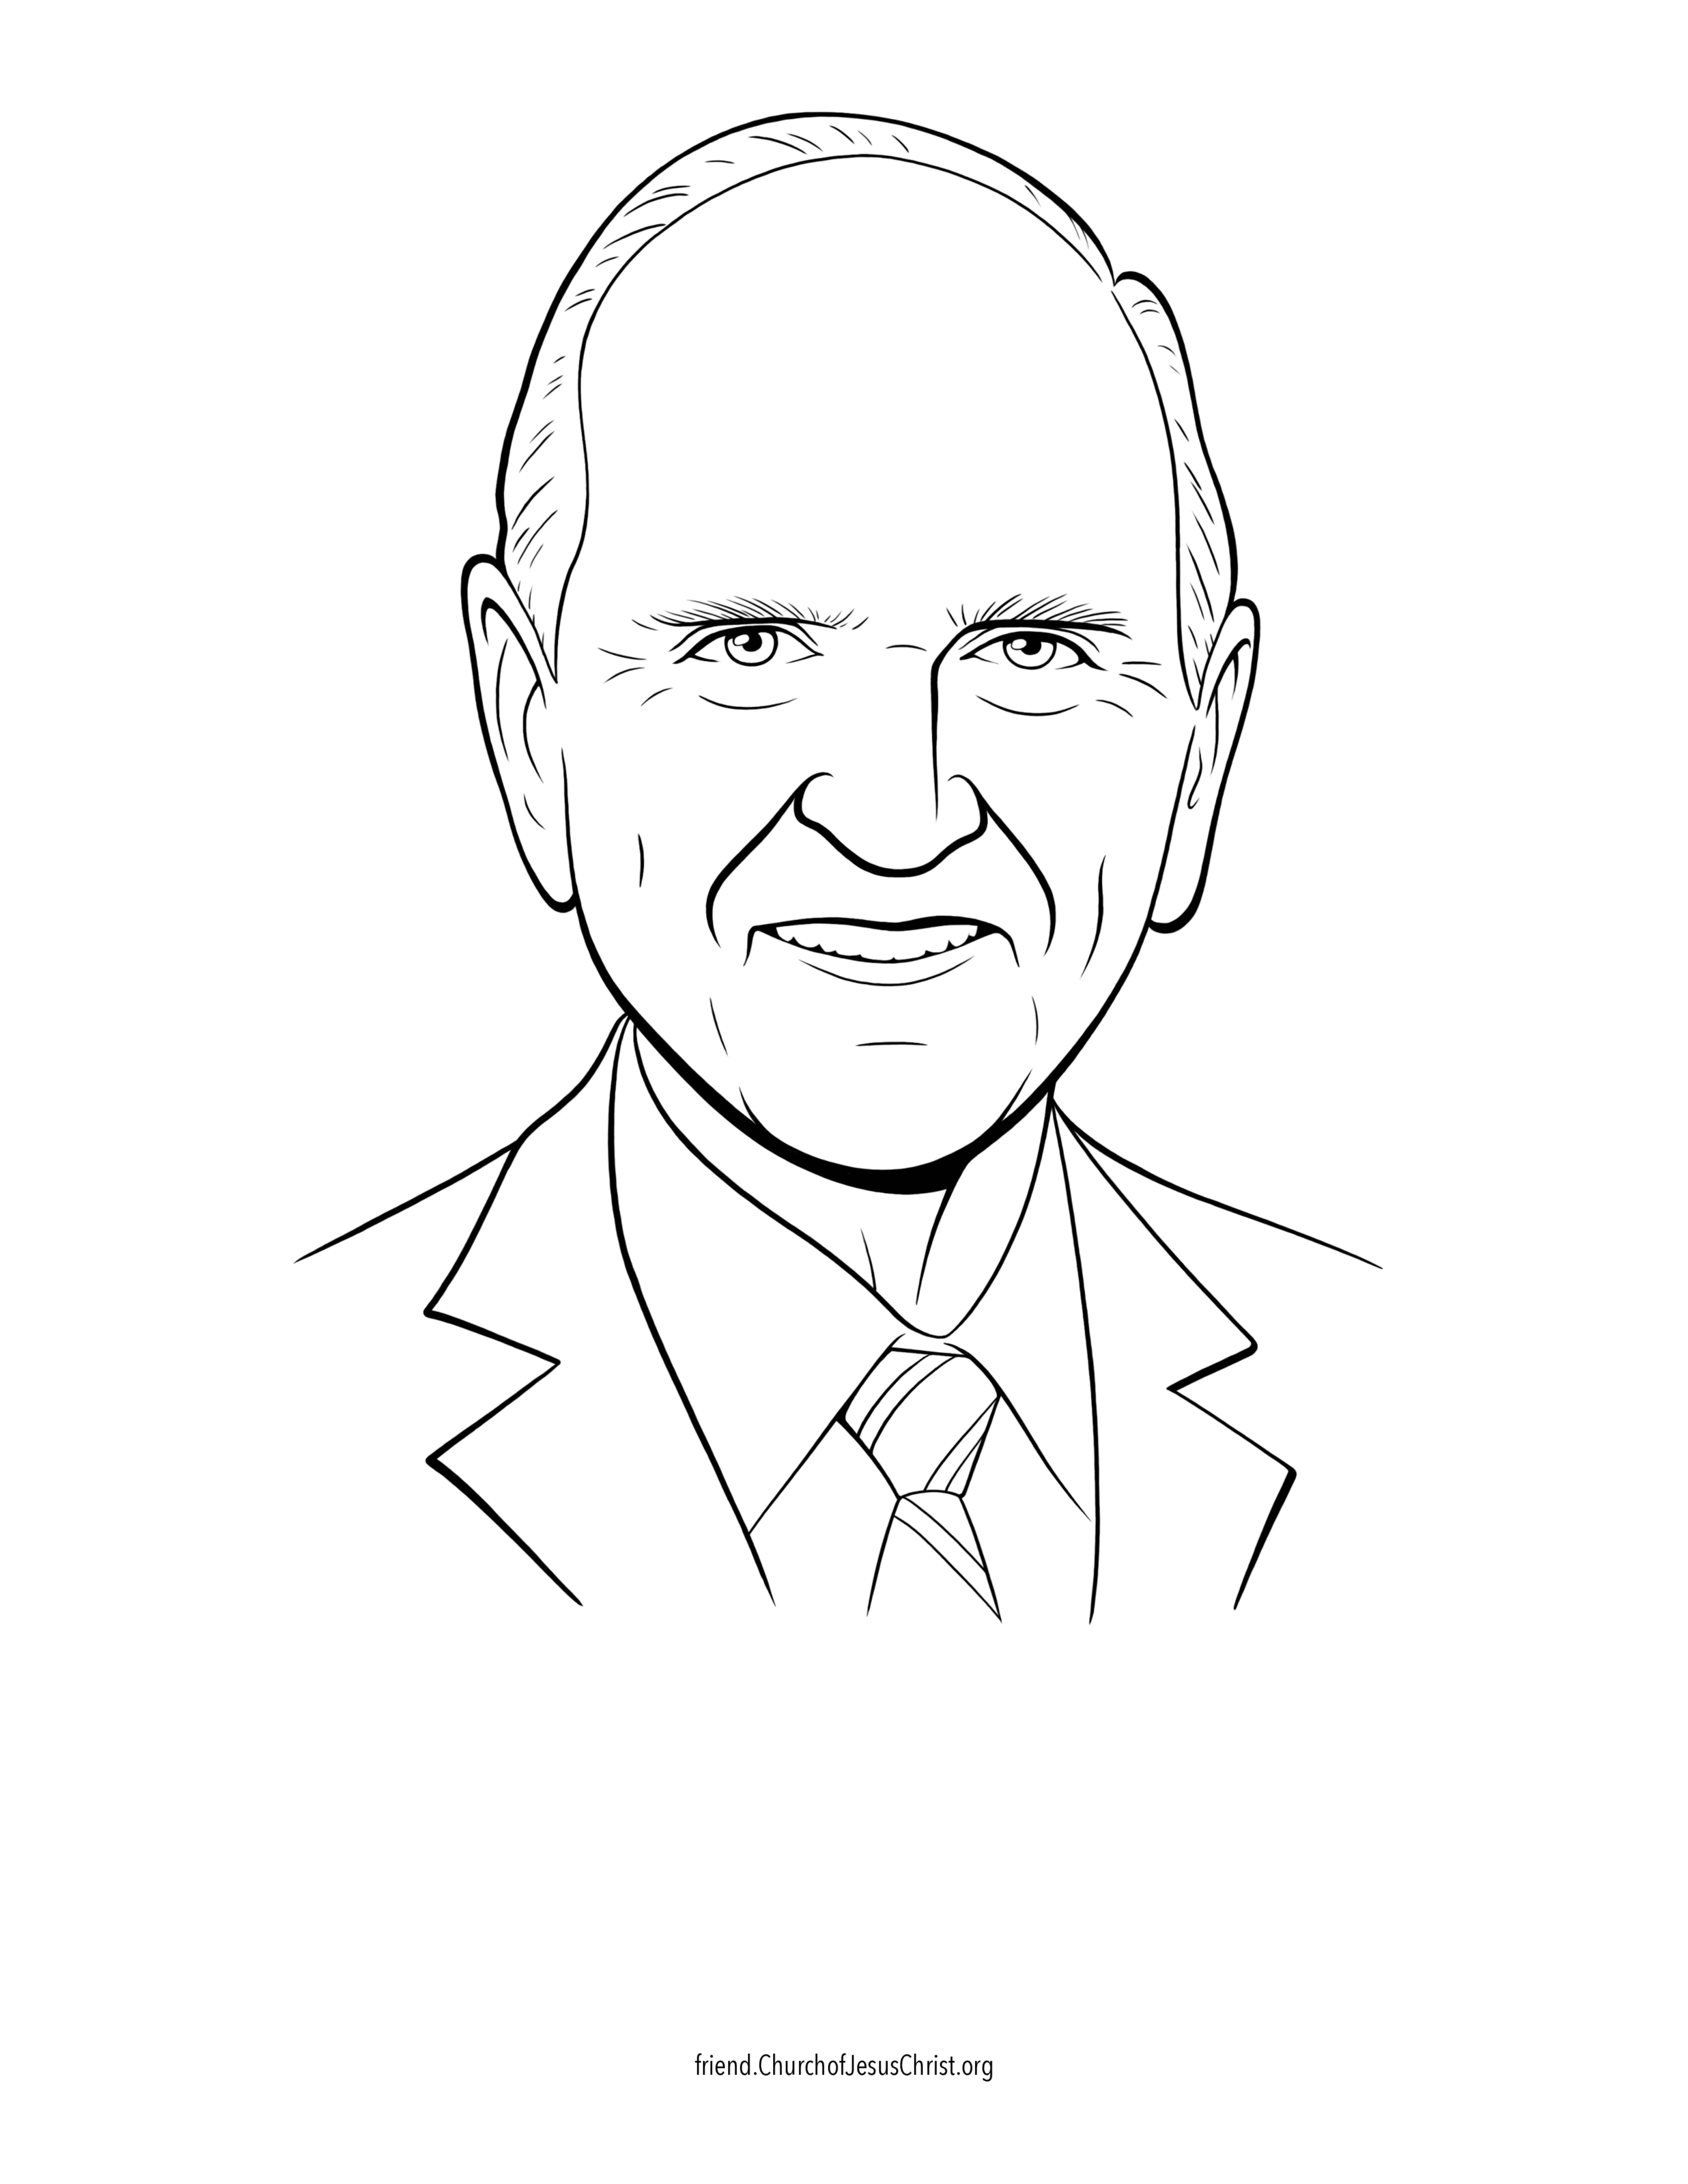 A coloring page of the official portrait of Russell M. Nelson.